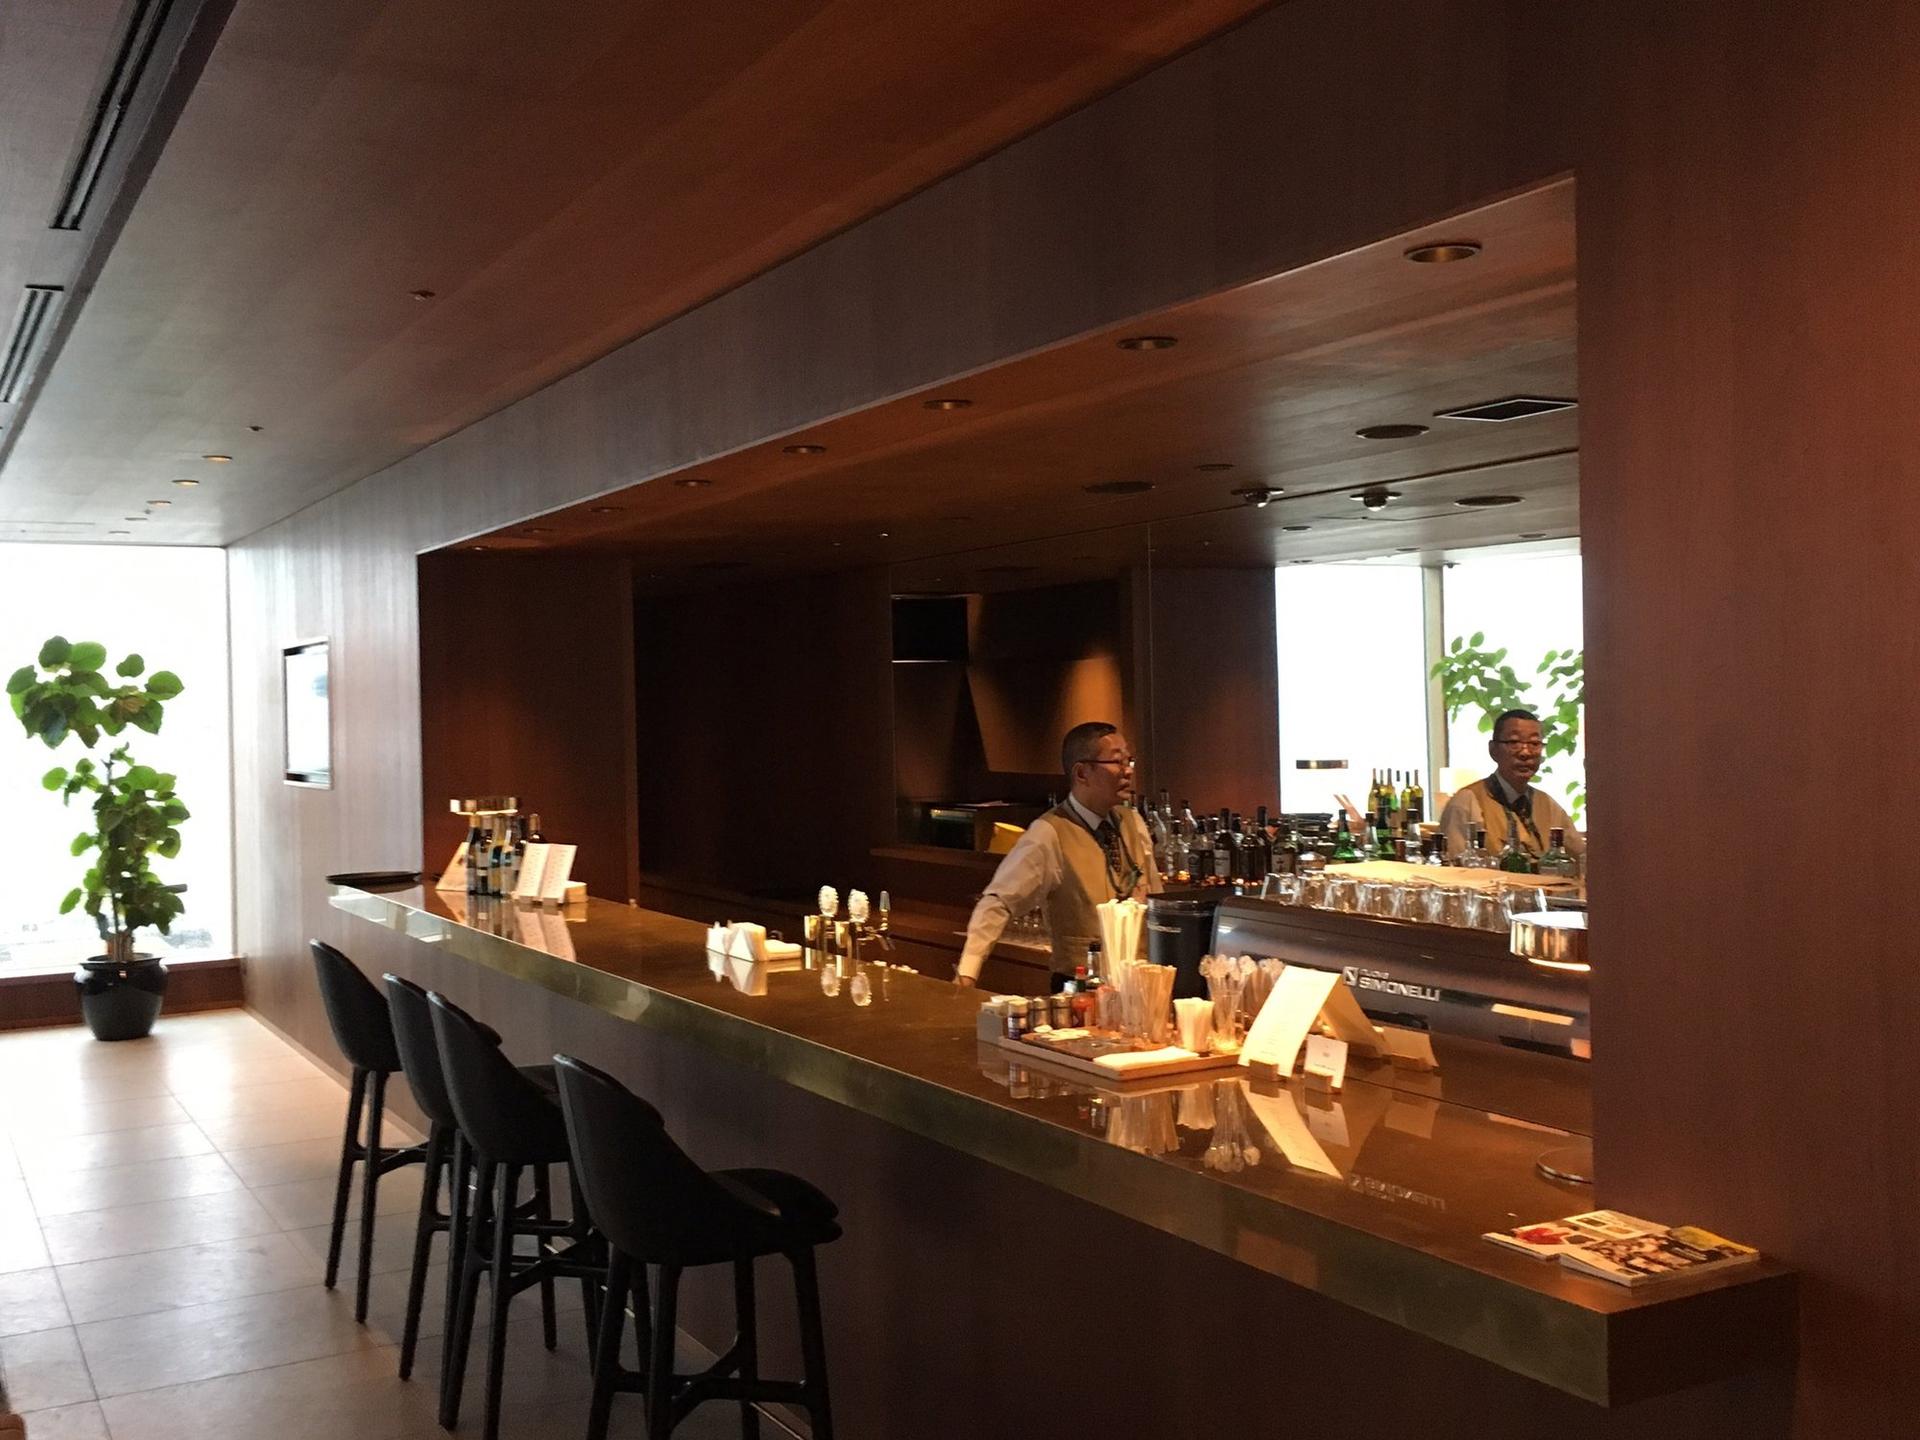 Cathay Pacific Lounge image 34 of 49